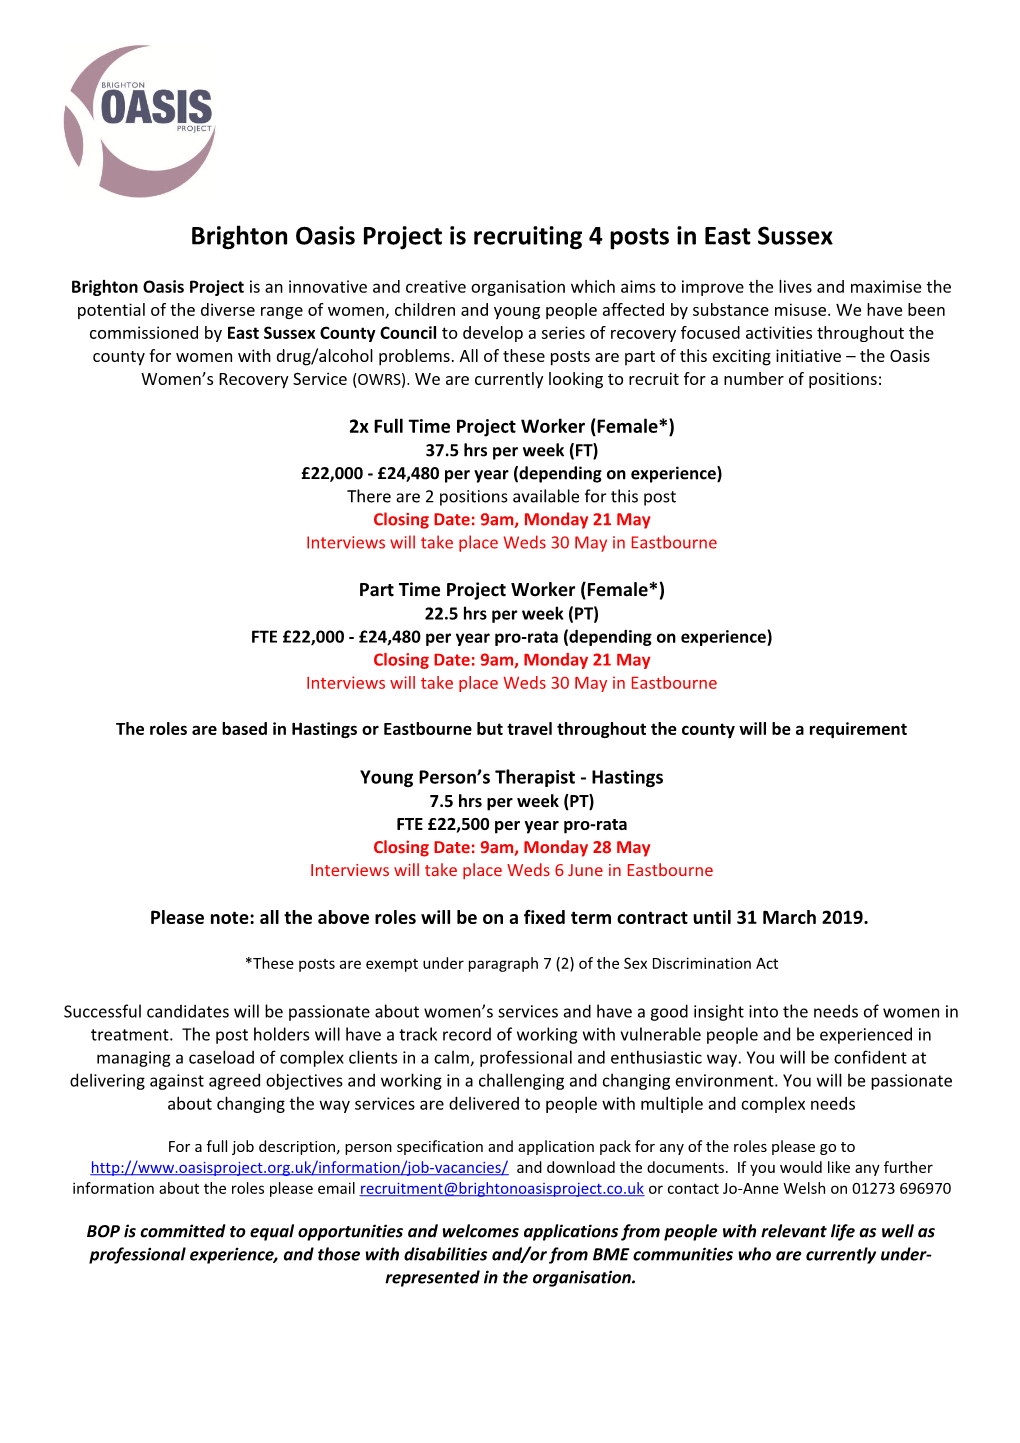 Brighton Oasis Project Is Recruiting 4Posts in East Sussex